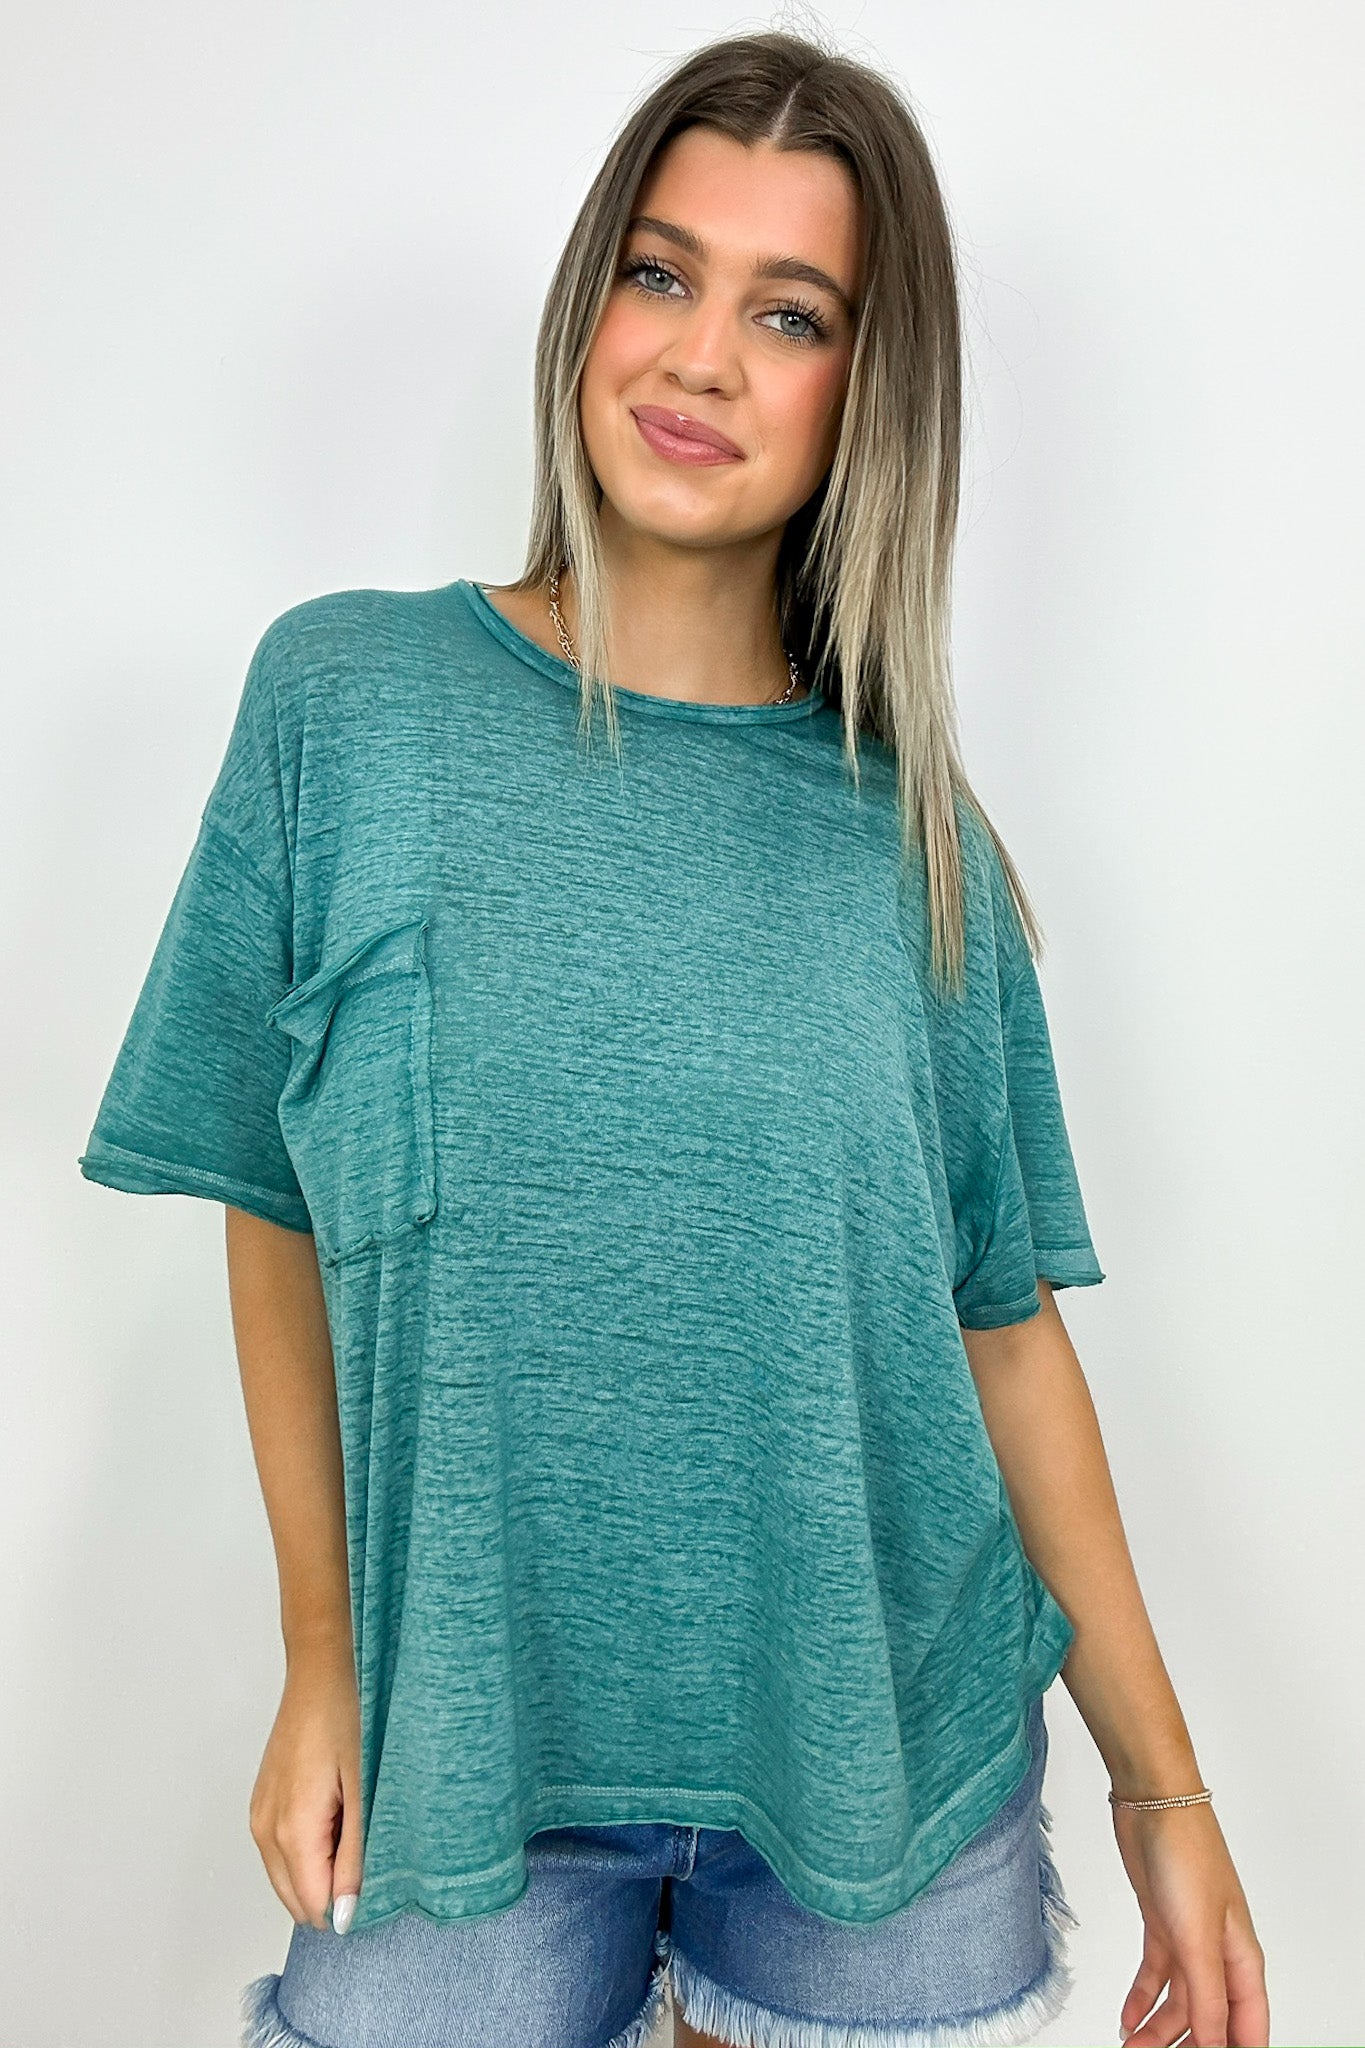 Dusty Teal / SM Marisol Burnout Wash Oversized Pocket Top - BACK IN STOCK - Madison and Mallory